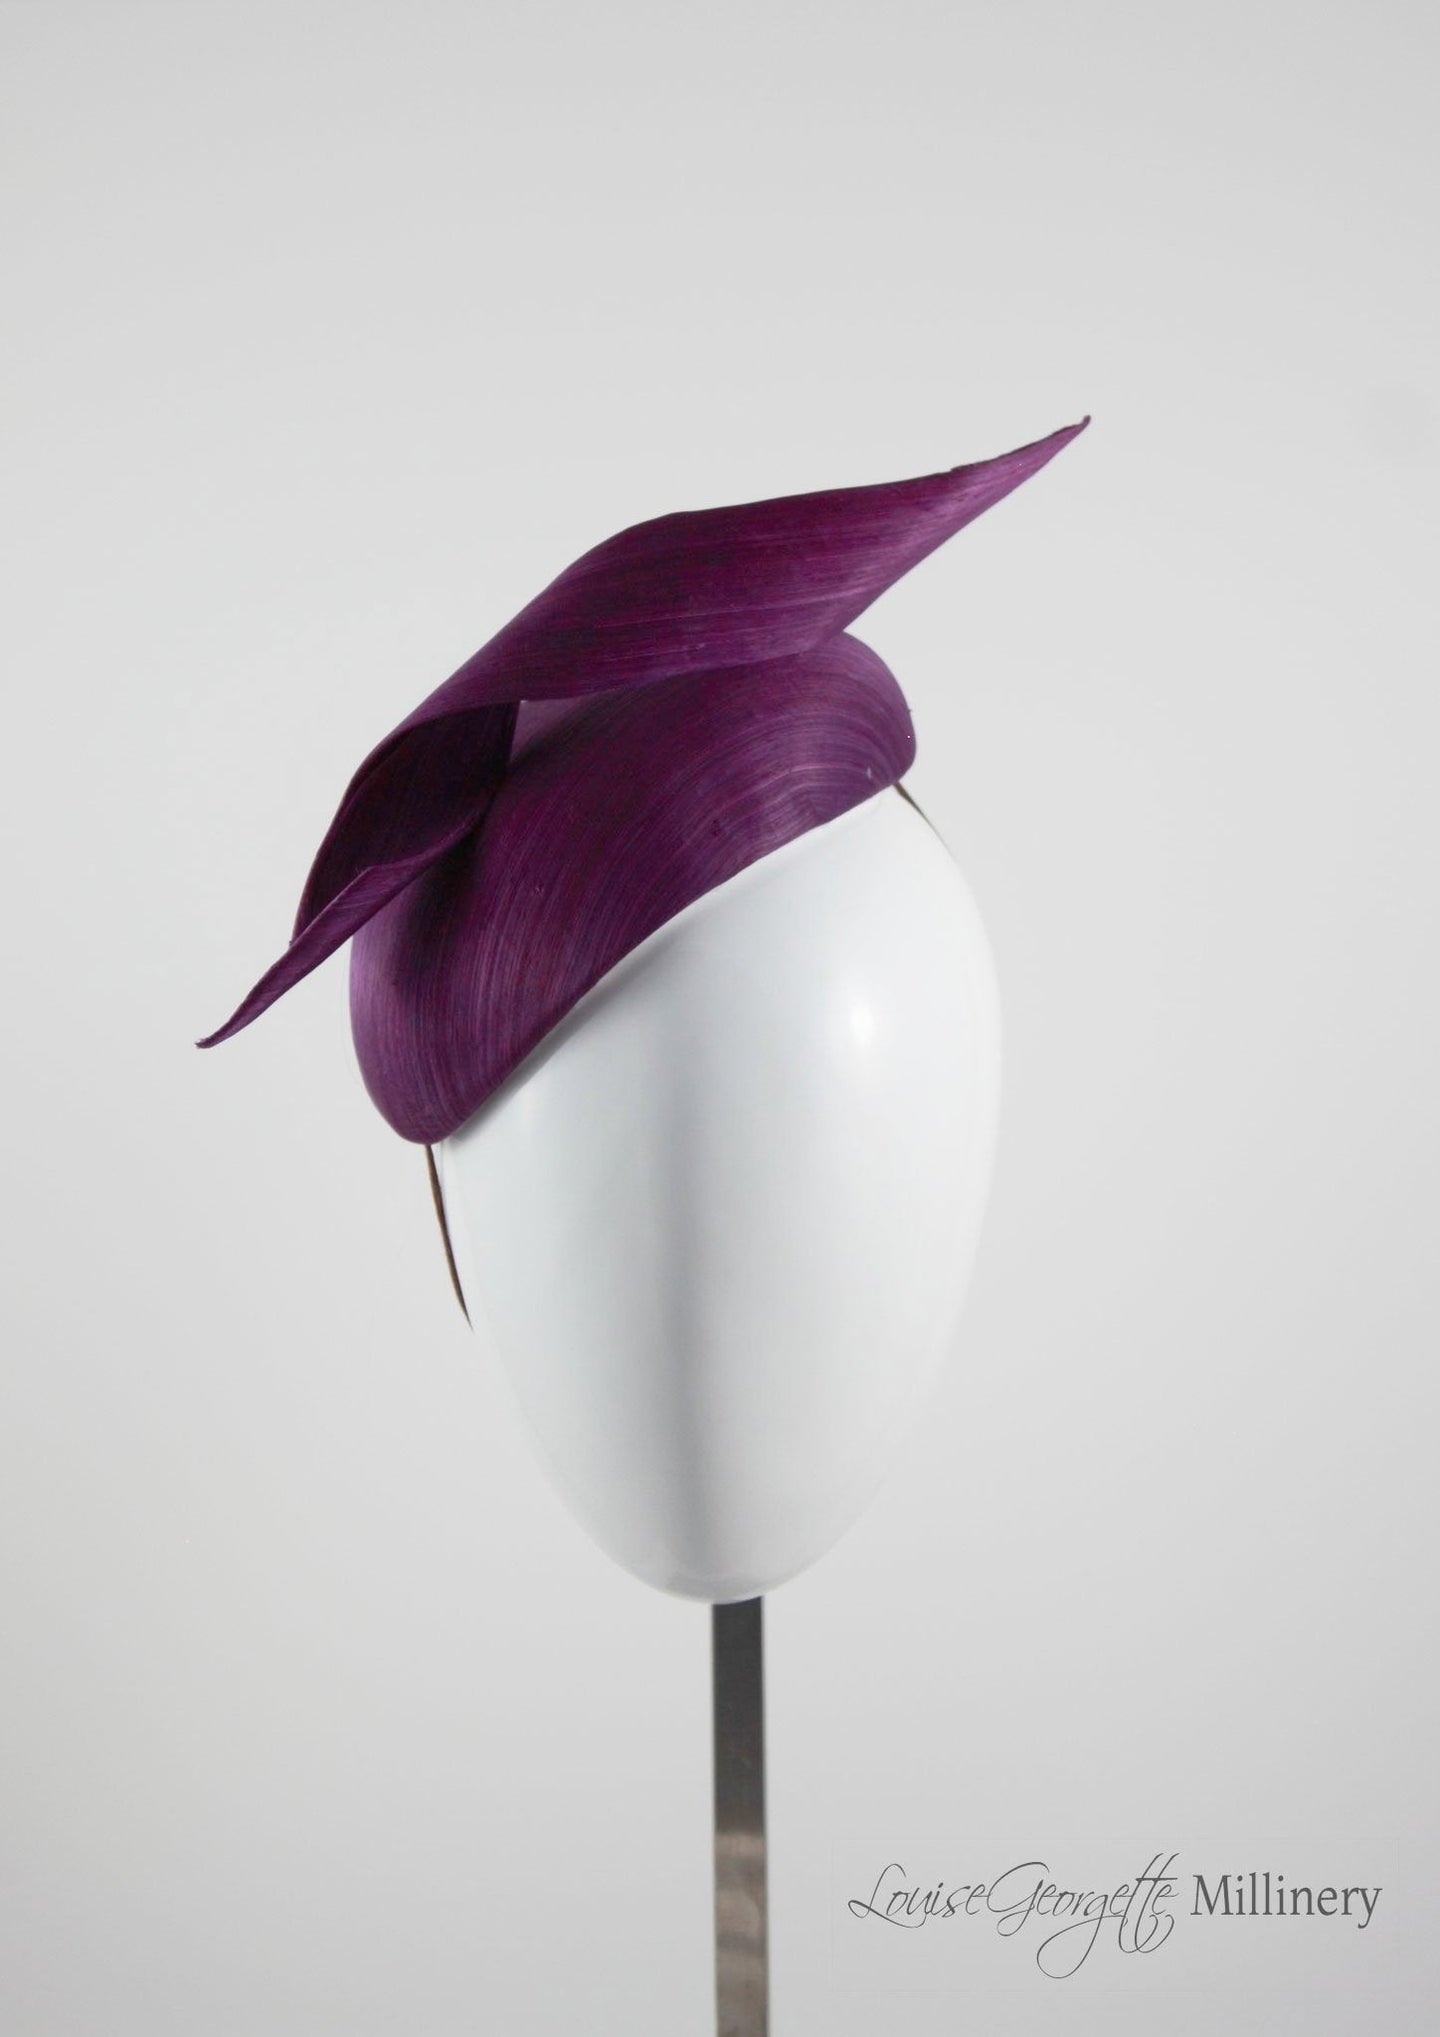 Silk Magenta Beret hat with twist detail. Handmade in London, Millinery suitable for racing, weddings and other special occasions. 